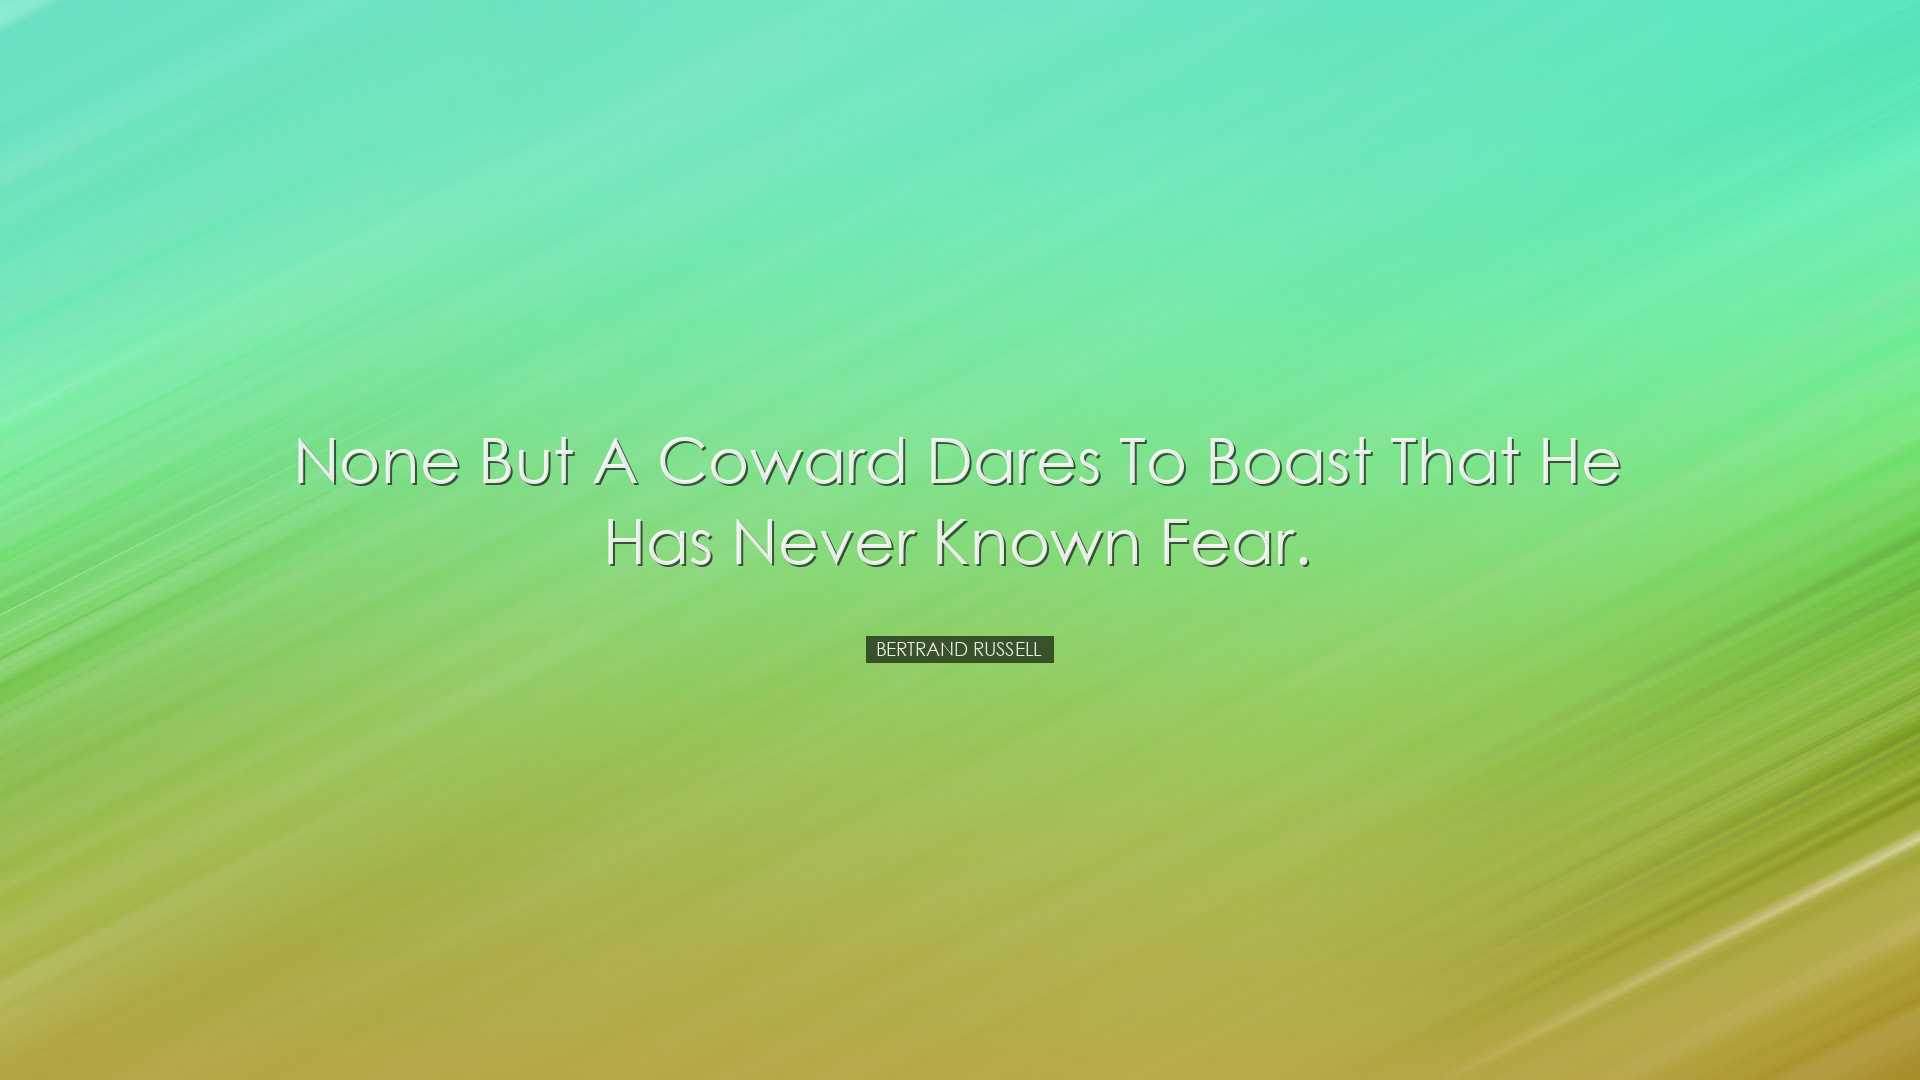 None but a coward dares to boast that he has never known fear. - B